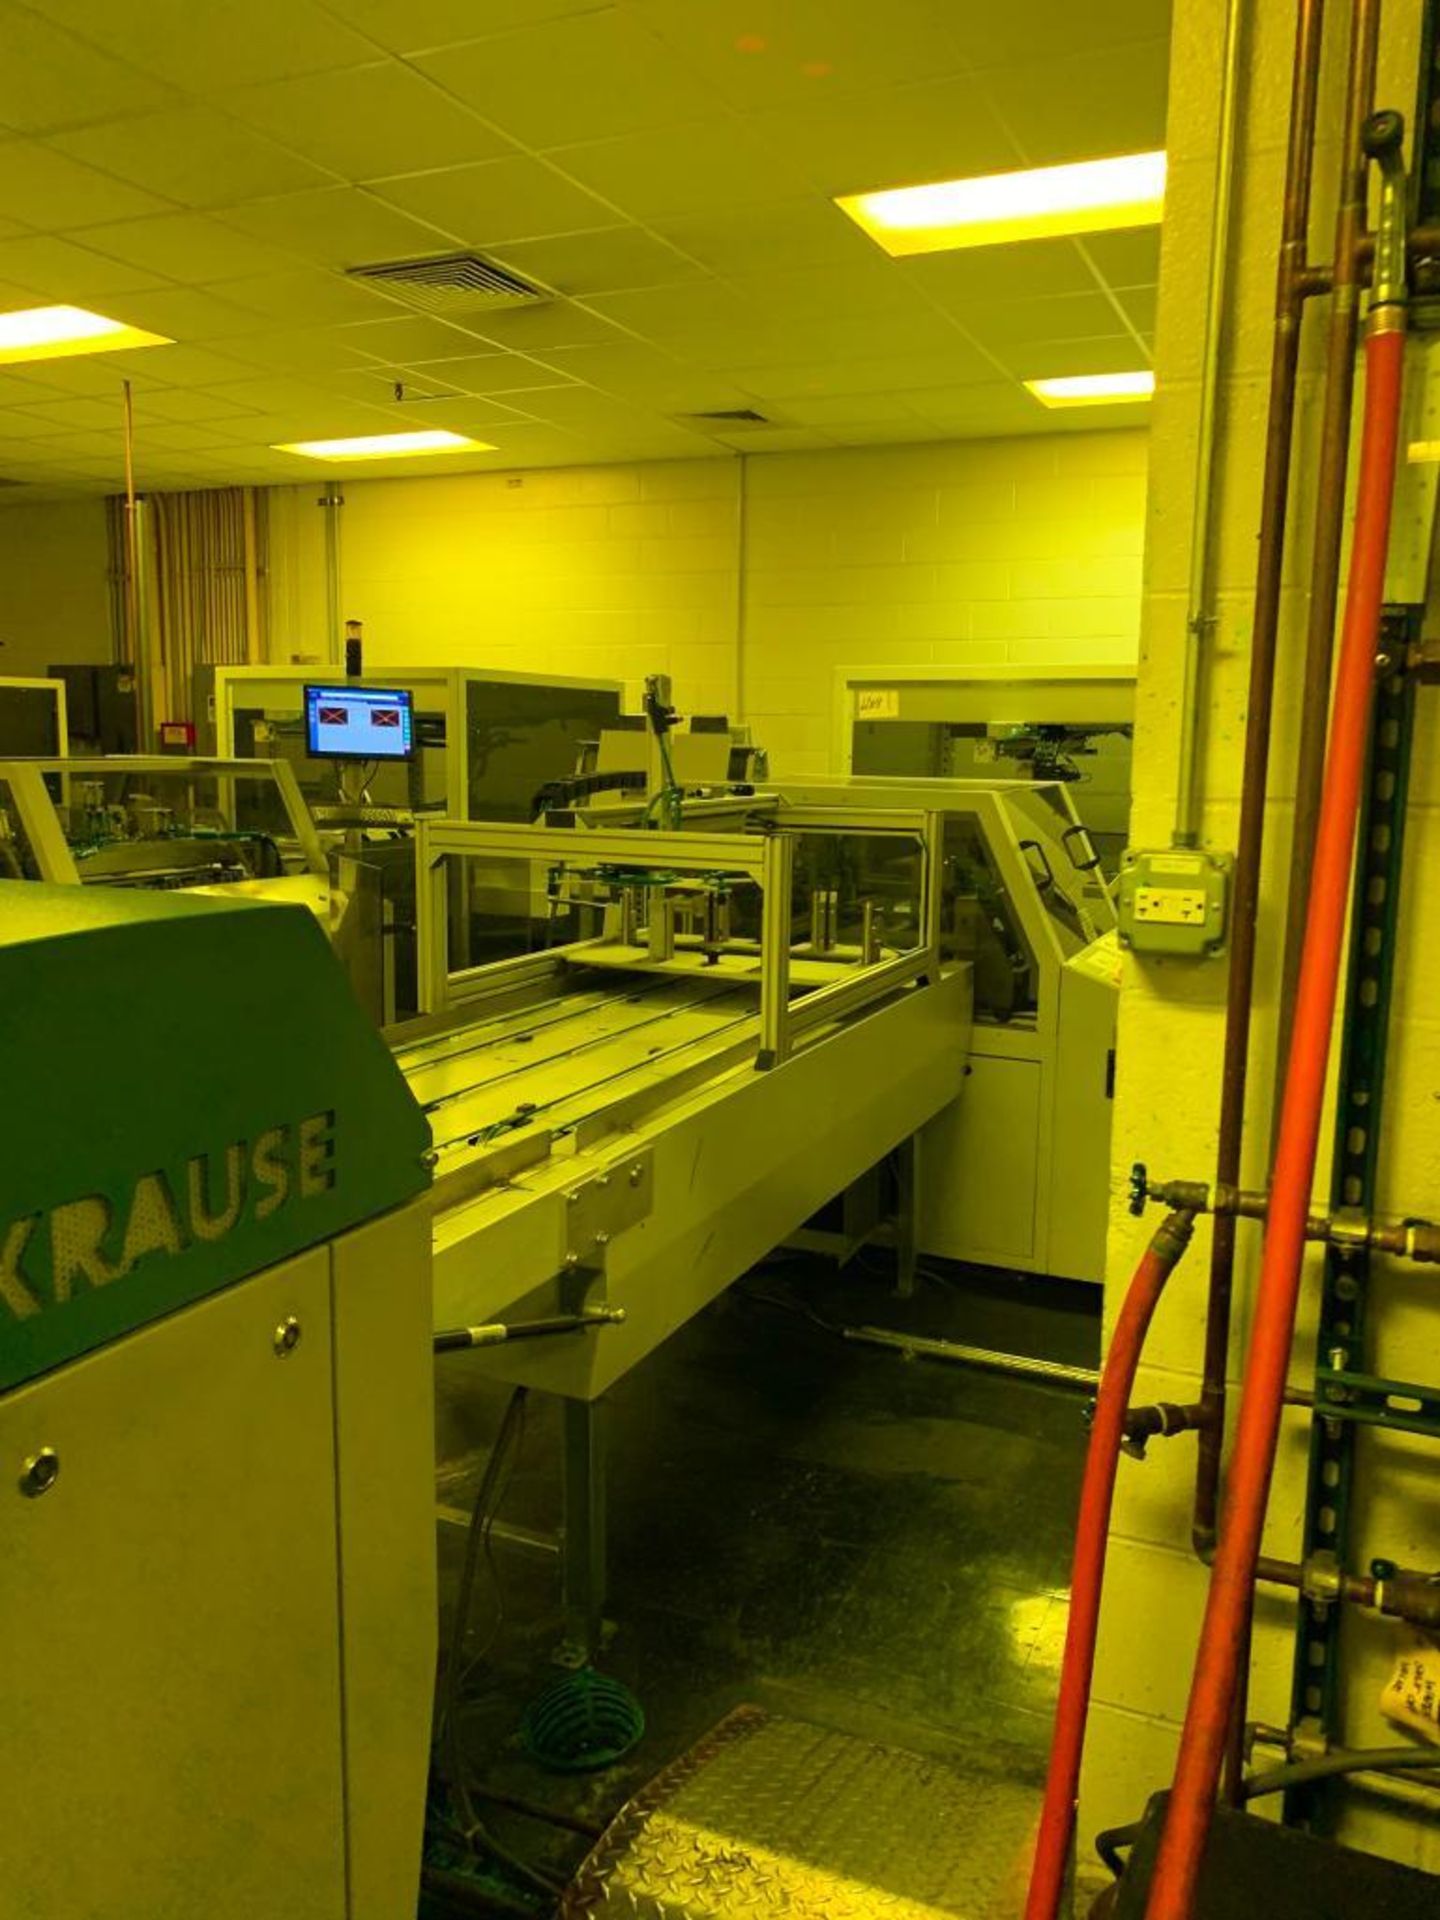 2008 Krause LS Jet Multi Format Plate Setter Line, Krause Bluefin XS High Performance Polymer Plate - Image 13 of 16